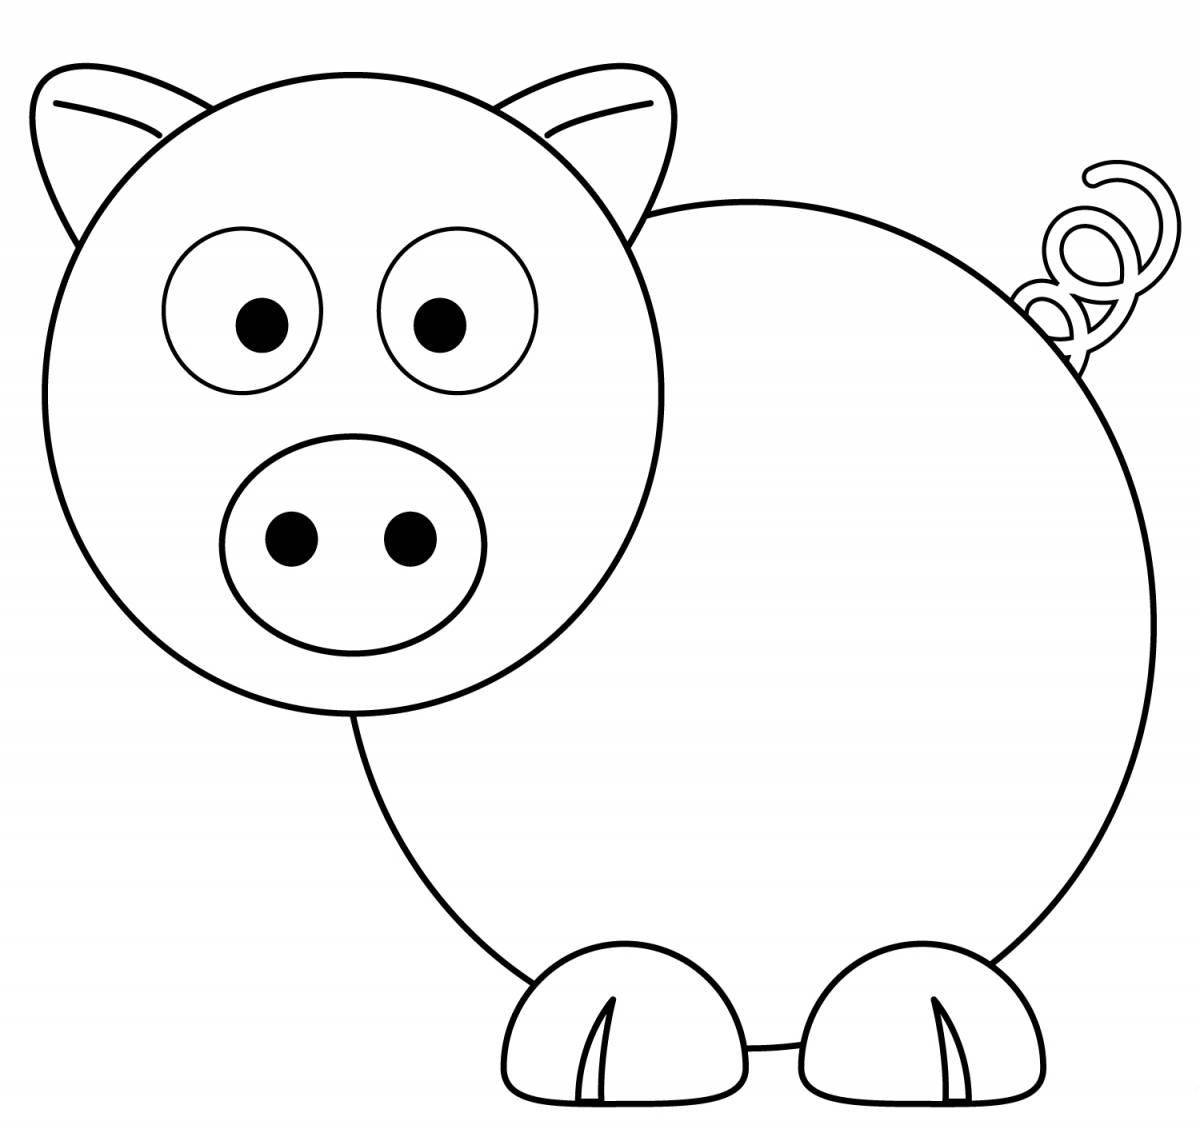 Humorous pig coloring for kids